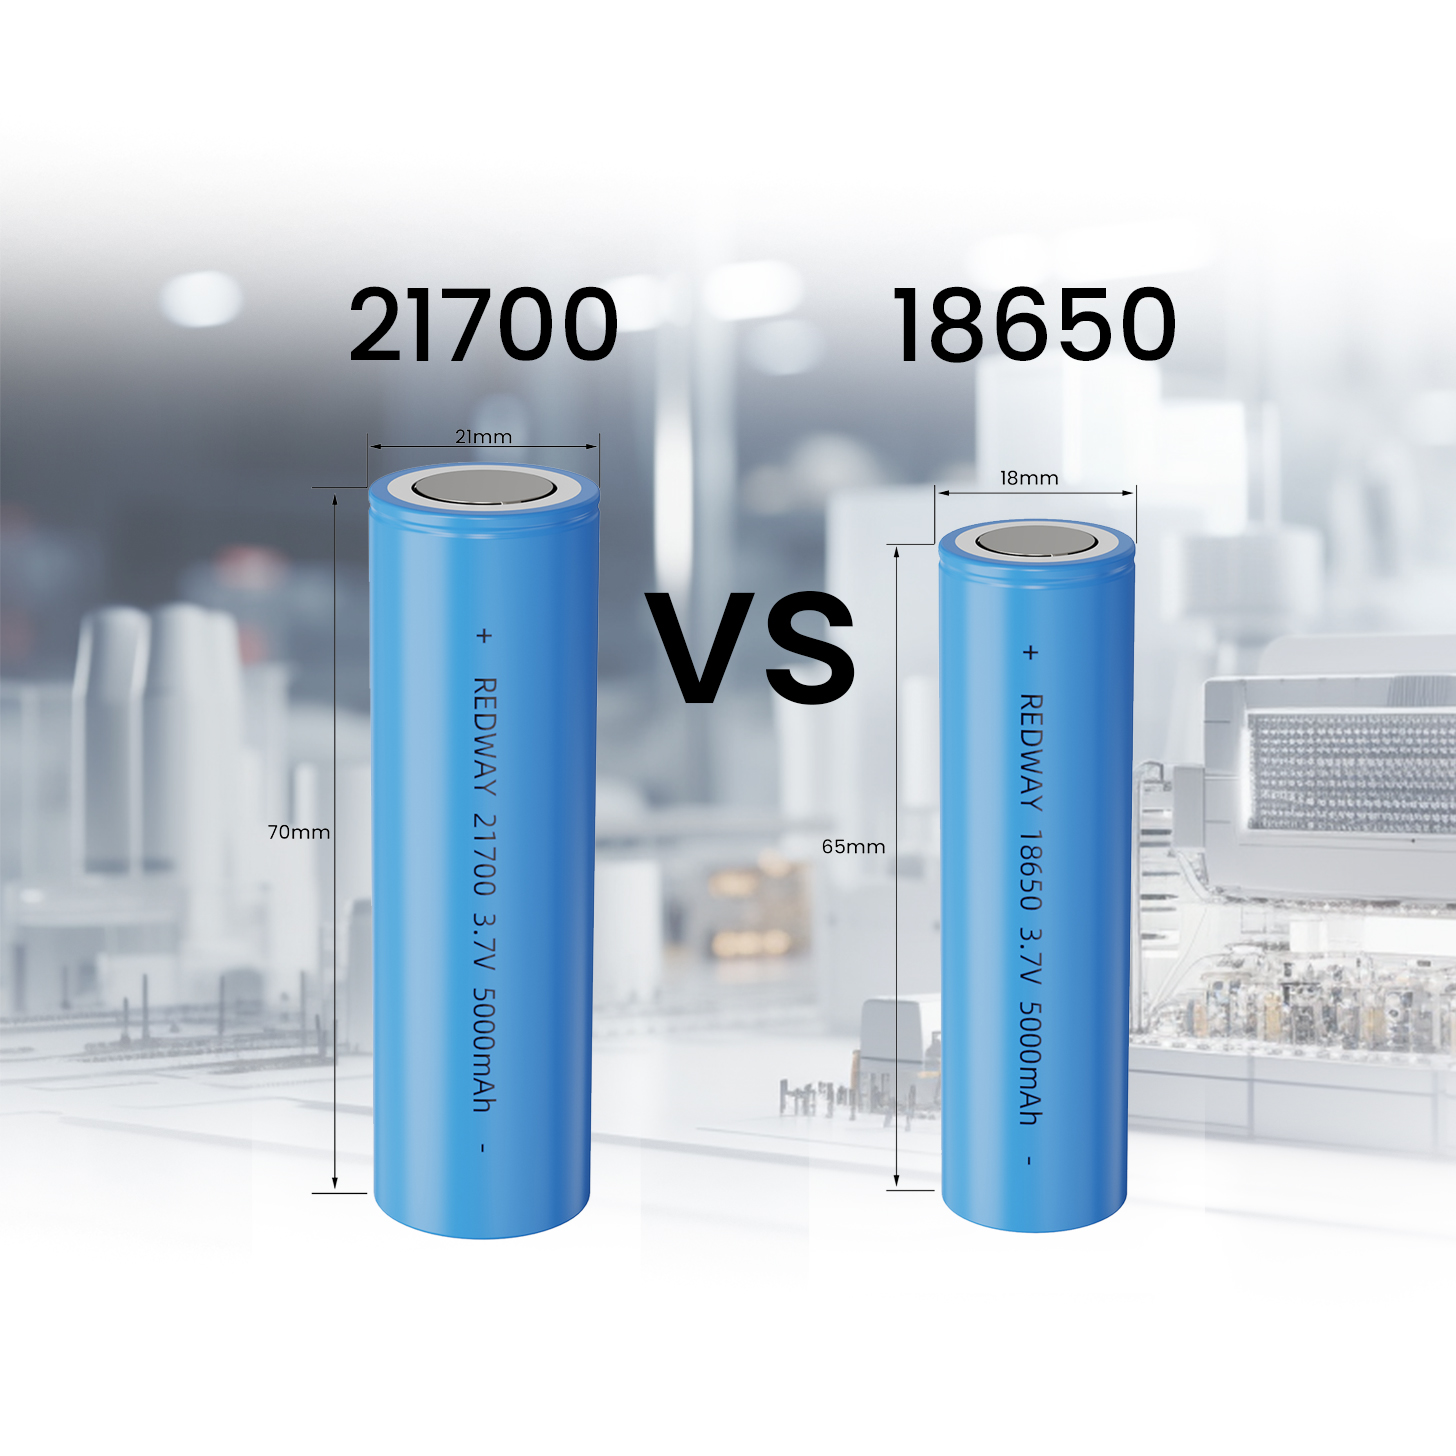 21700 vs 18650 Battery, Which One is Better？